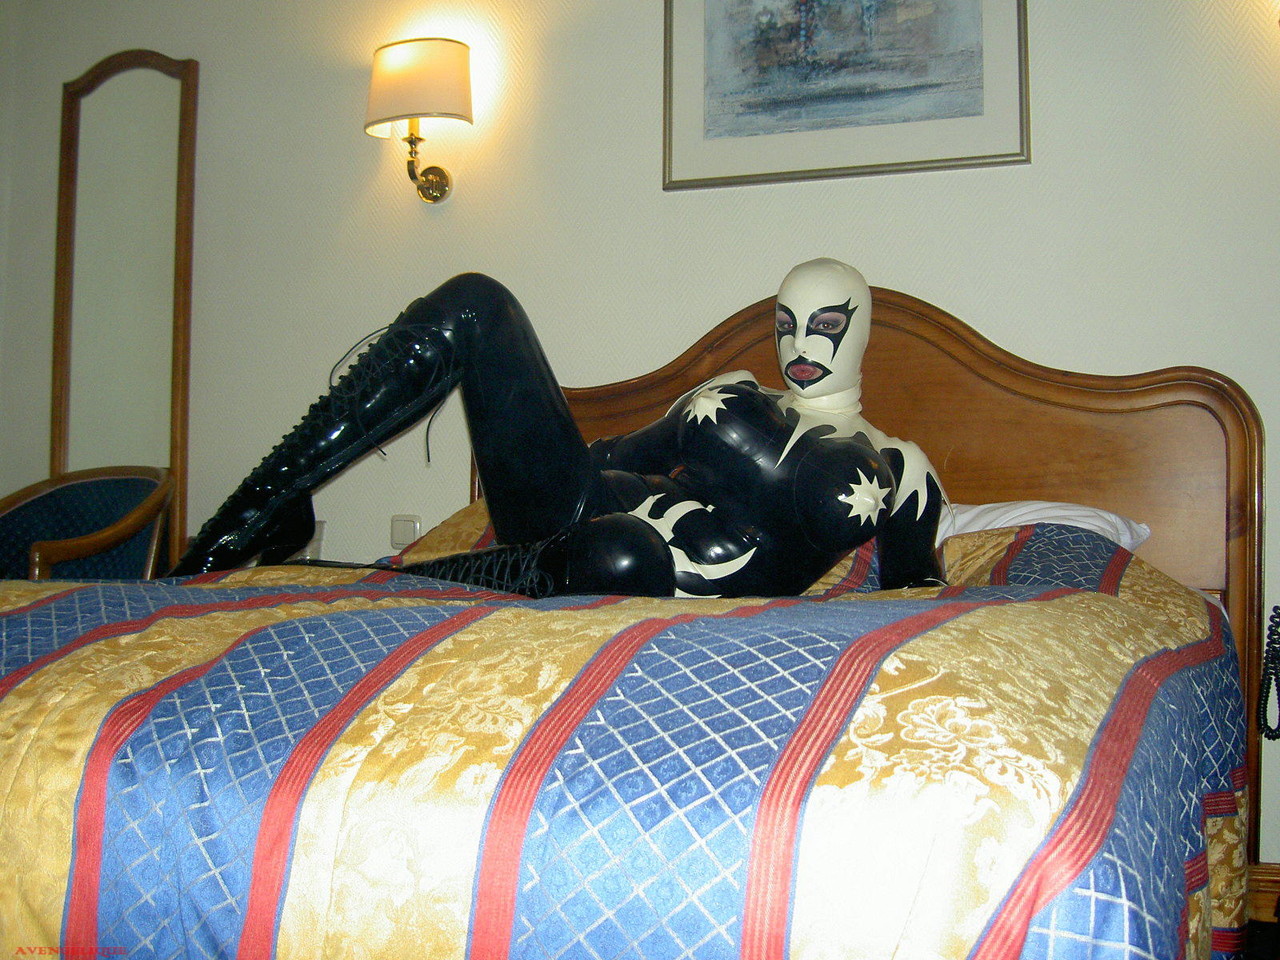 Fetish model Darkwing Zero poses on a hotel room bed in latex clothing foto porno #426050021 | Rubber Tits Pics, Darkwing Zero, Latex, porno móvil